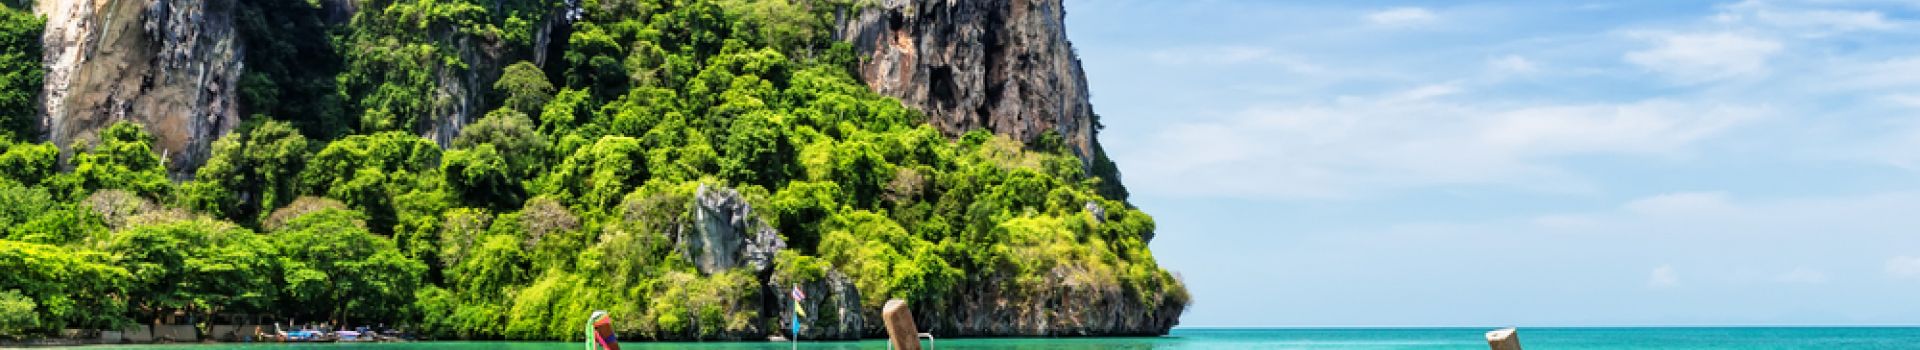 Cheap holidays to Thailand with Cassidy Travel